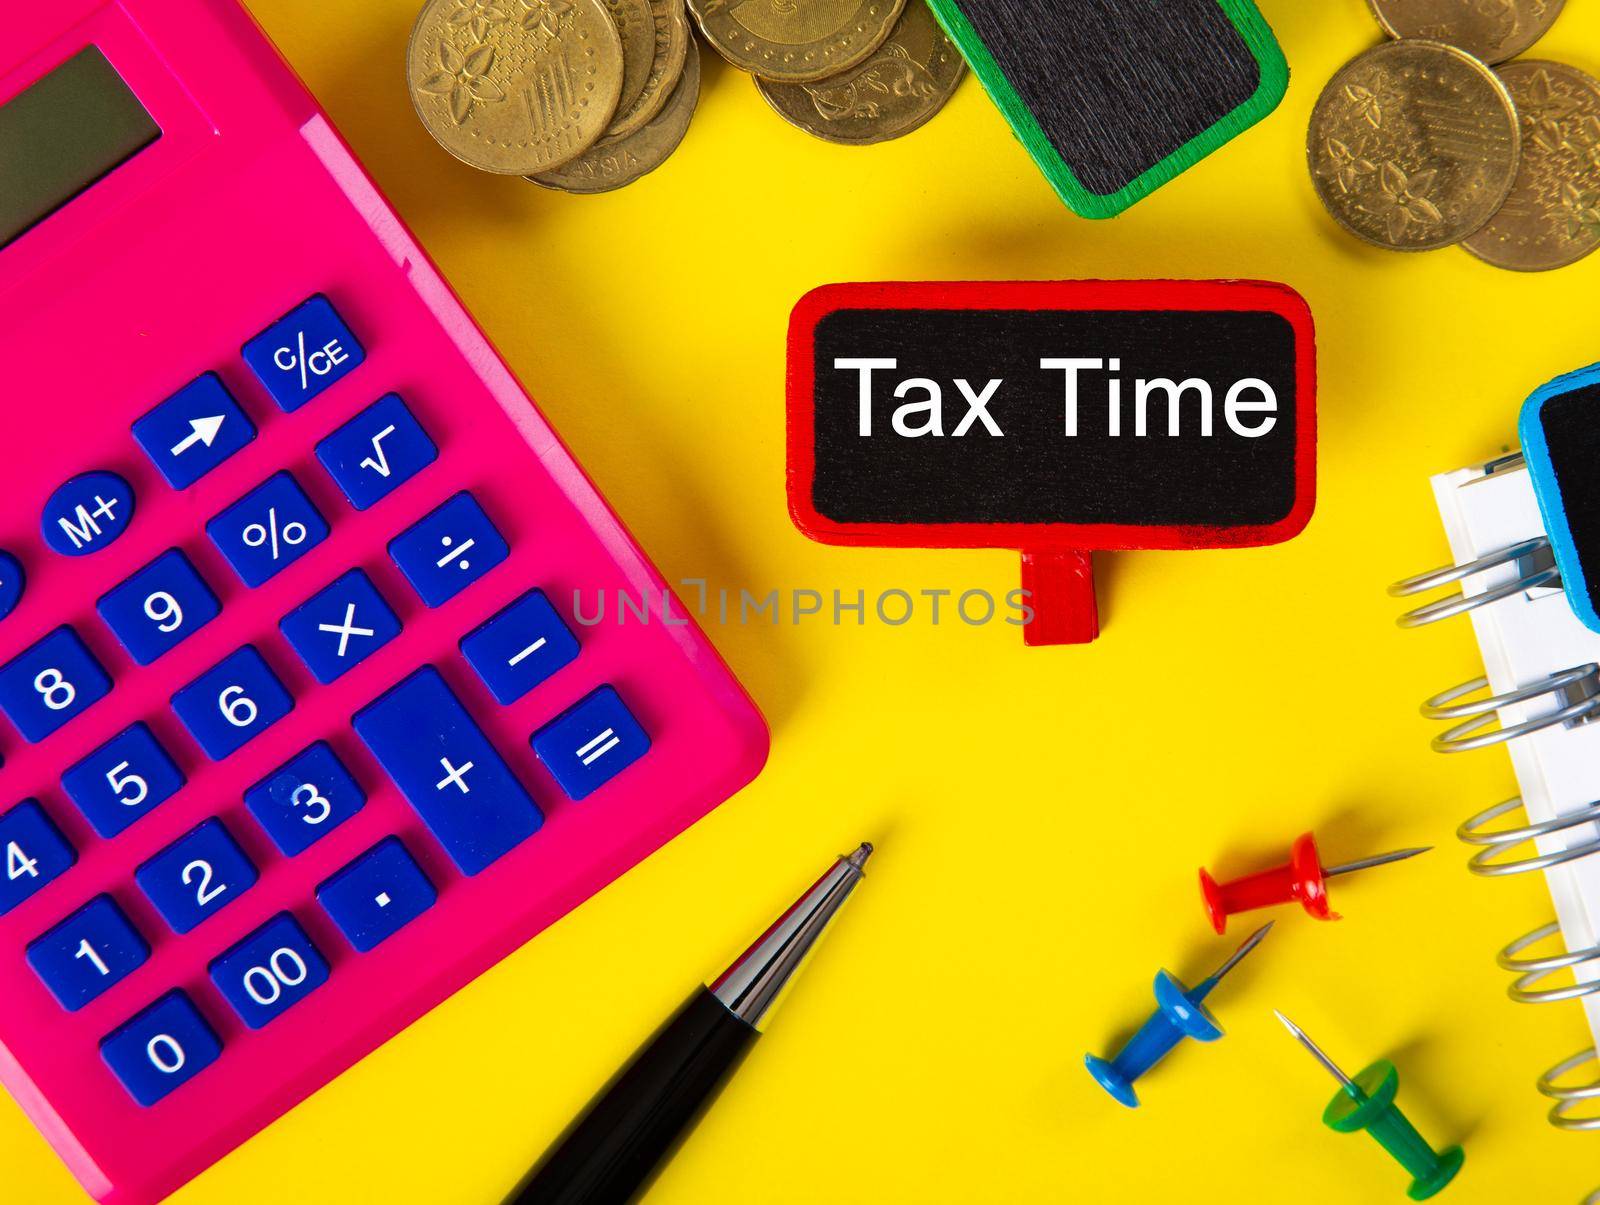 Tax time - Notification of the need to file tax returns by tehcheesiong